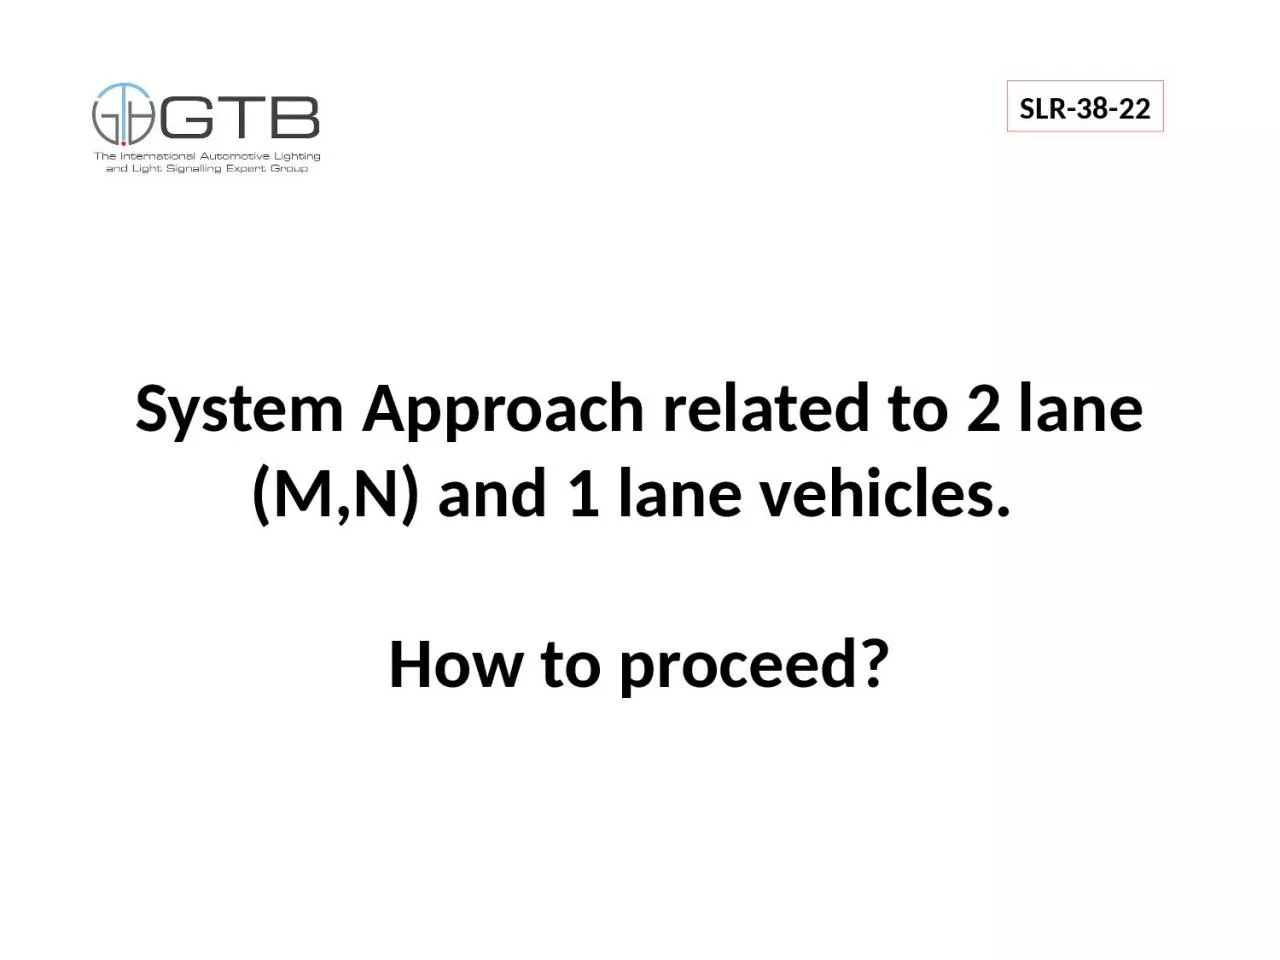 System Approach related to 2 lane (M,N) and 1 lane vehicles.